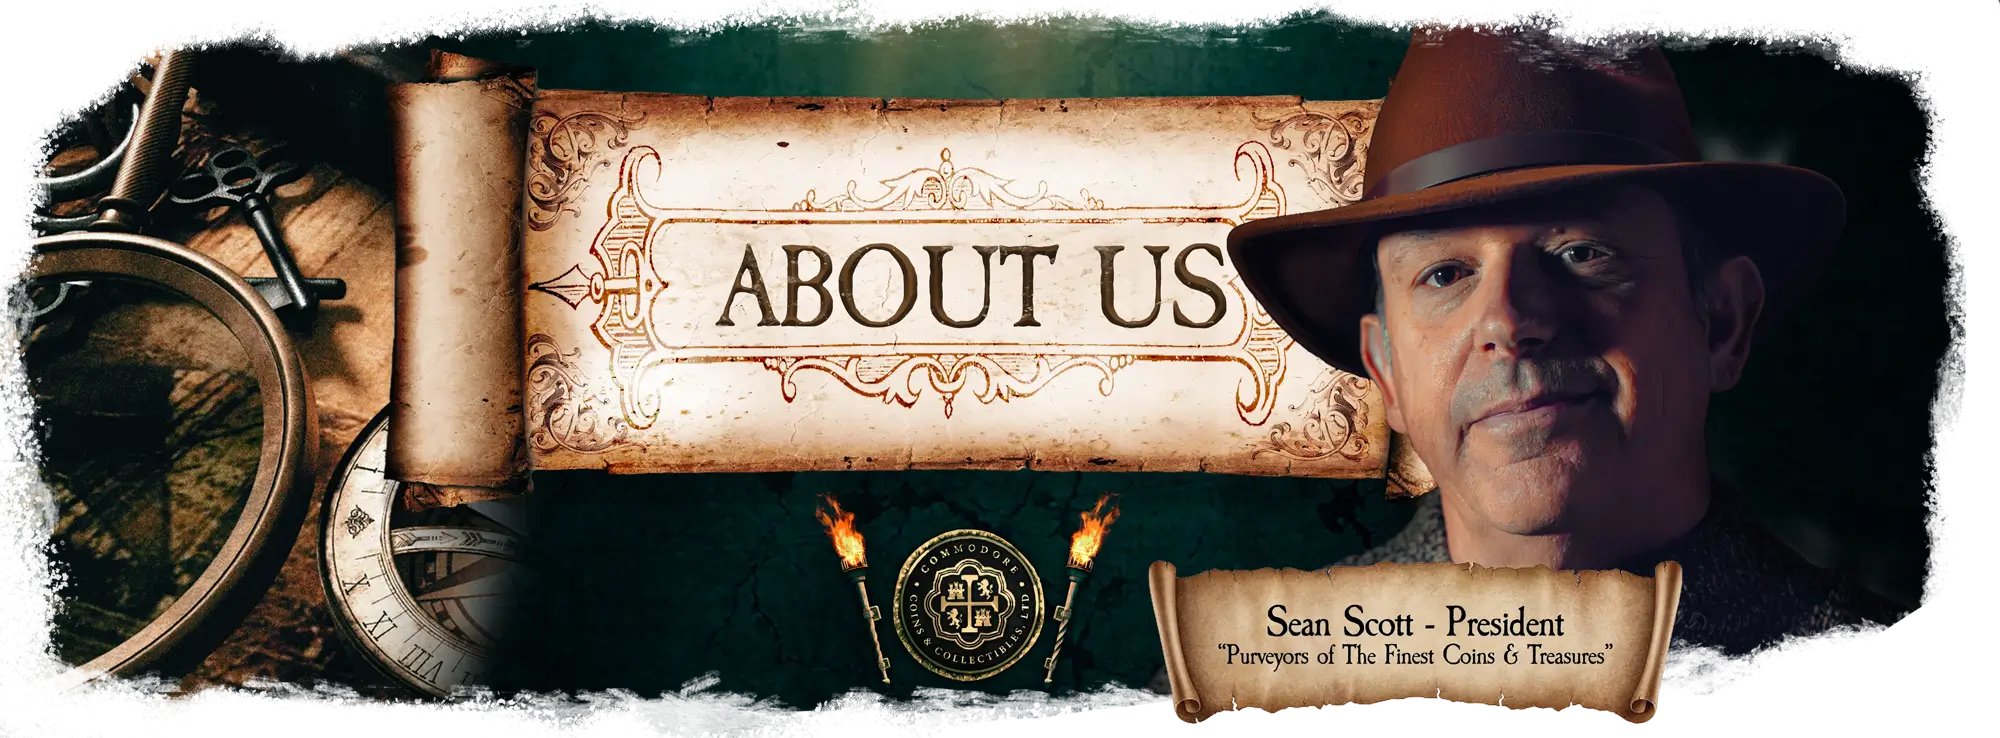 About Us: Sean Scott, President. Purveyors of the Finest Coins and Treasures